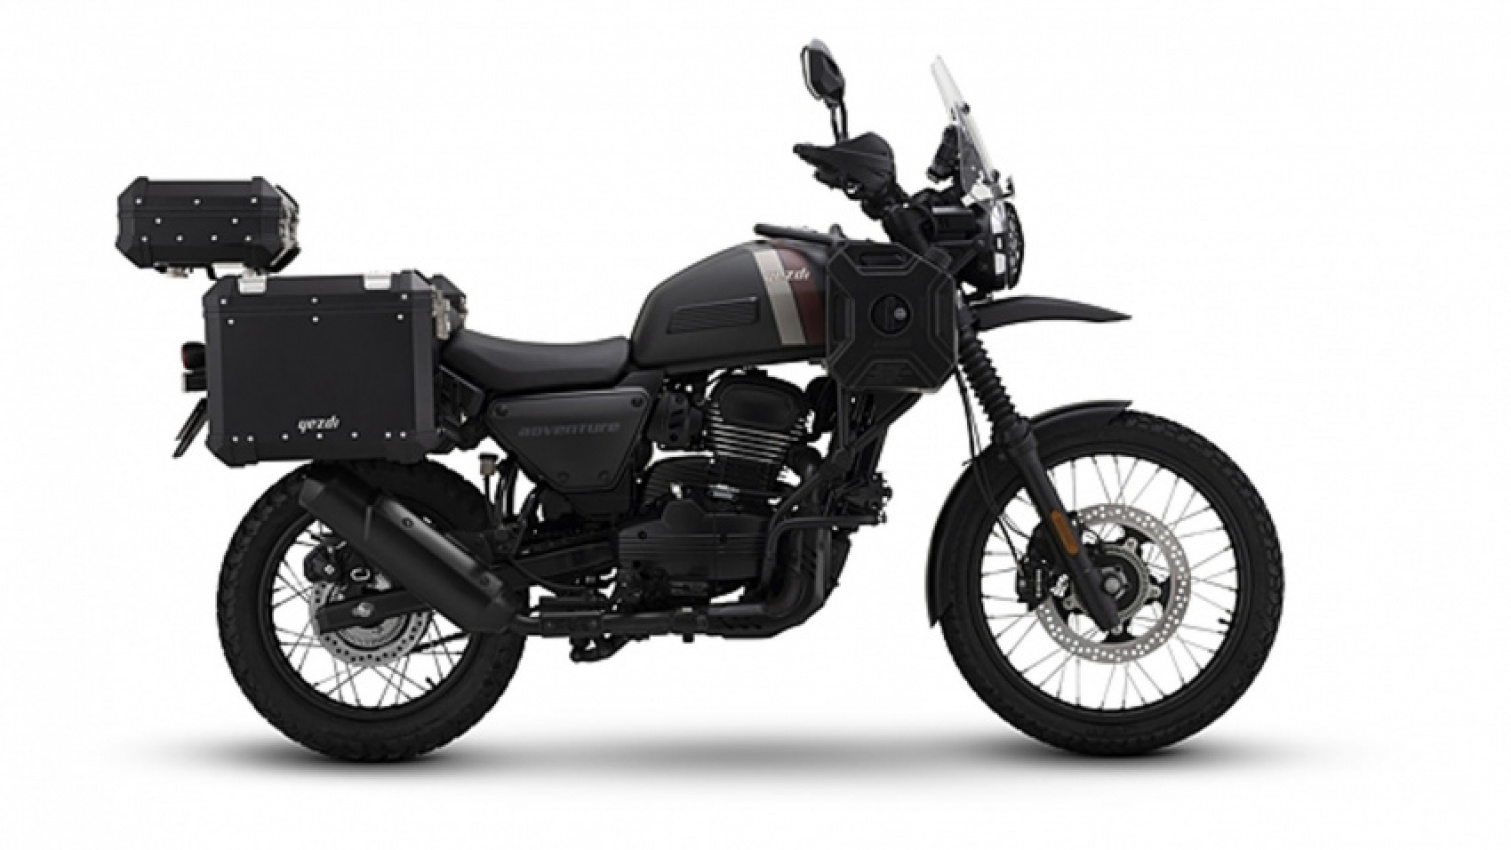 autos, cars, ram, yezdi adventure, scrambler and roadster deliveries commence in india